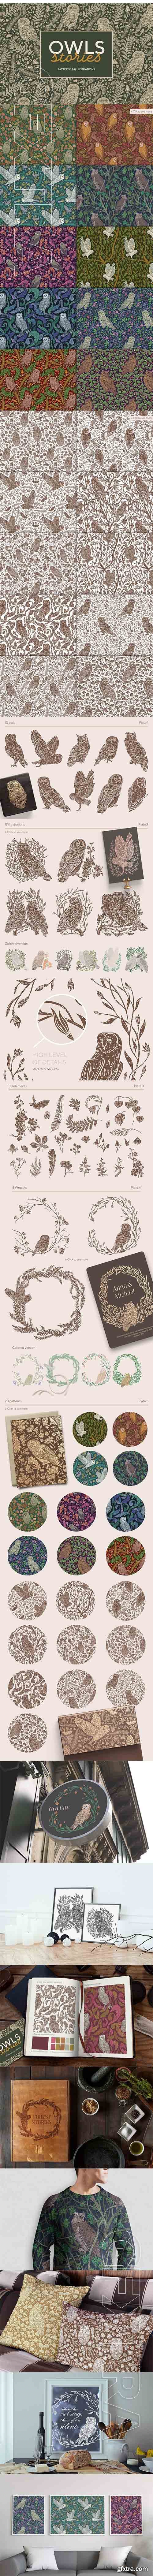 CreativeMarket - Owls graphic collection 2196049